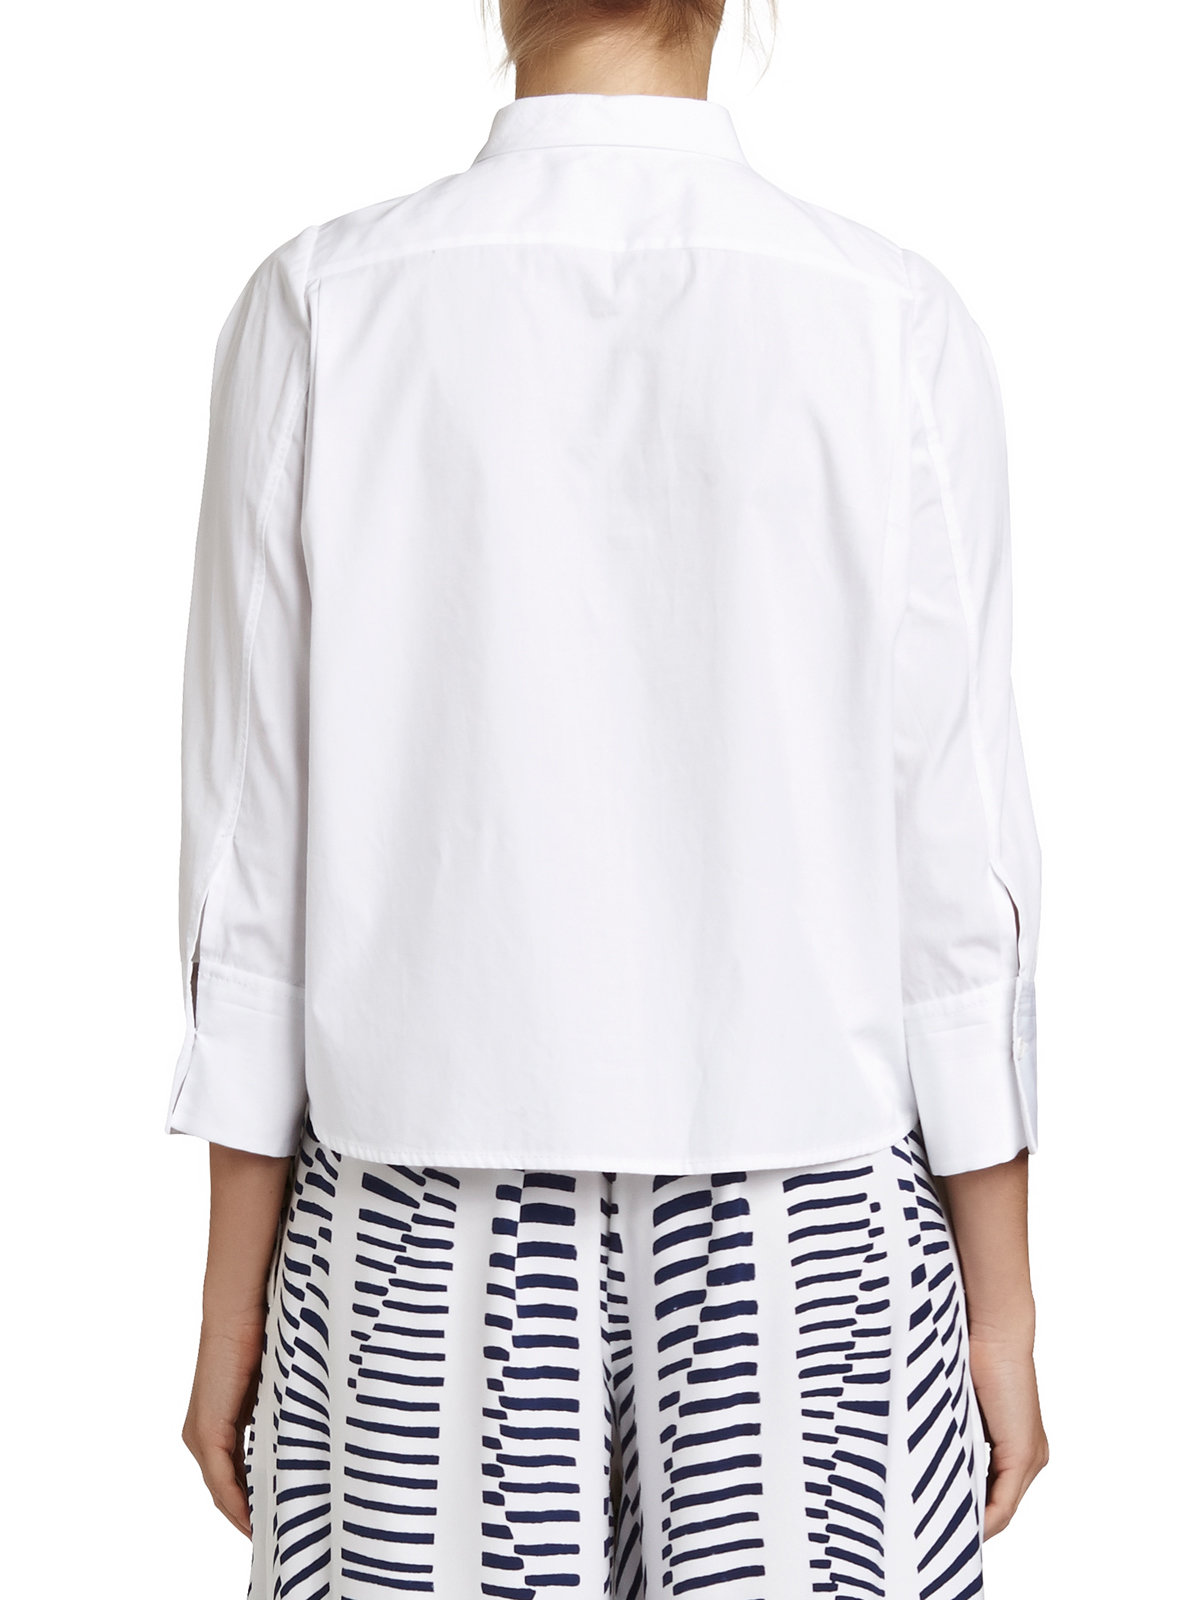 Lyst - Maiyet Cropped Button Down Shirt in White